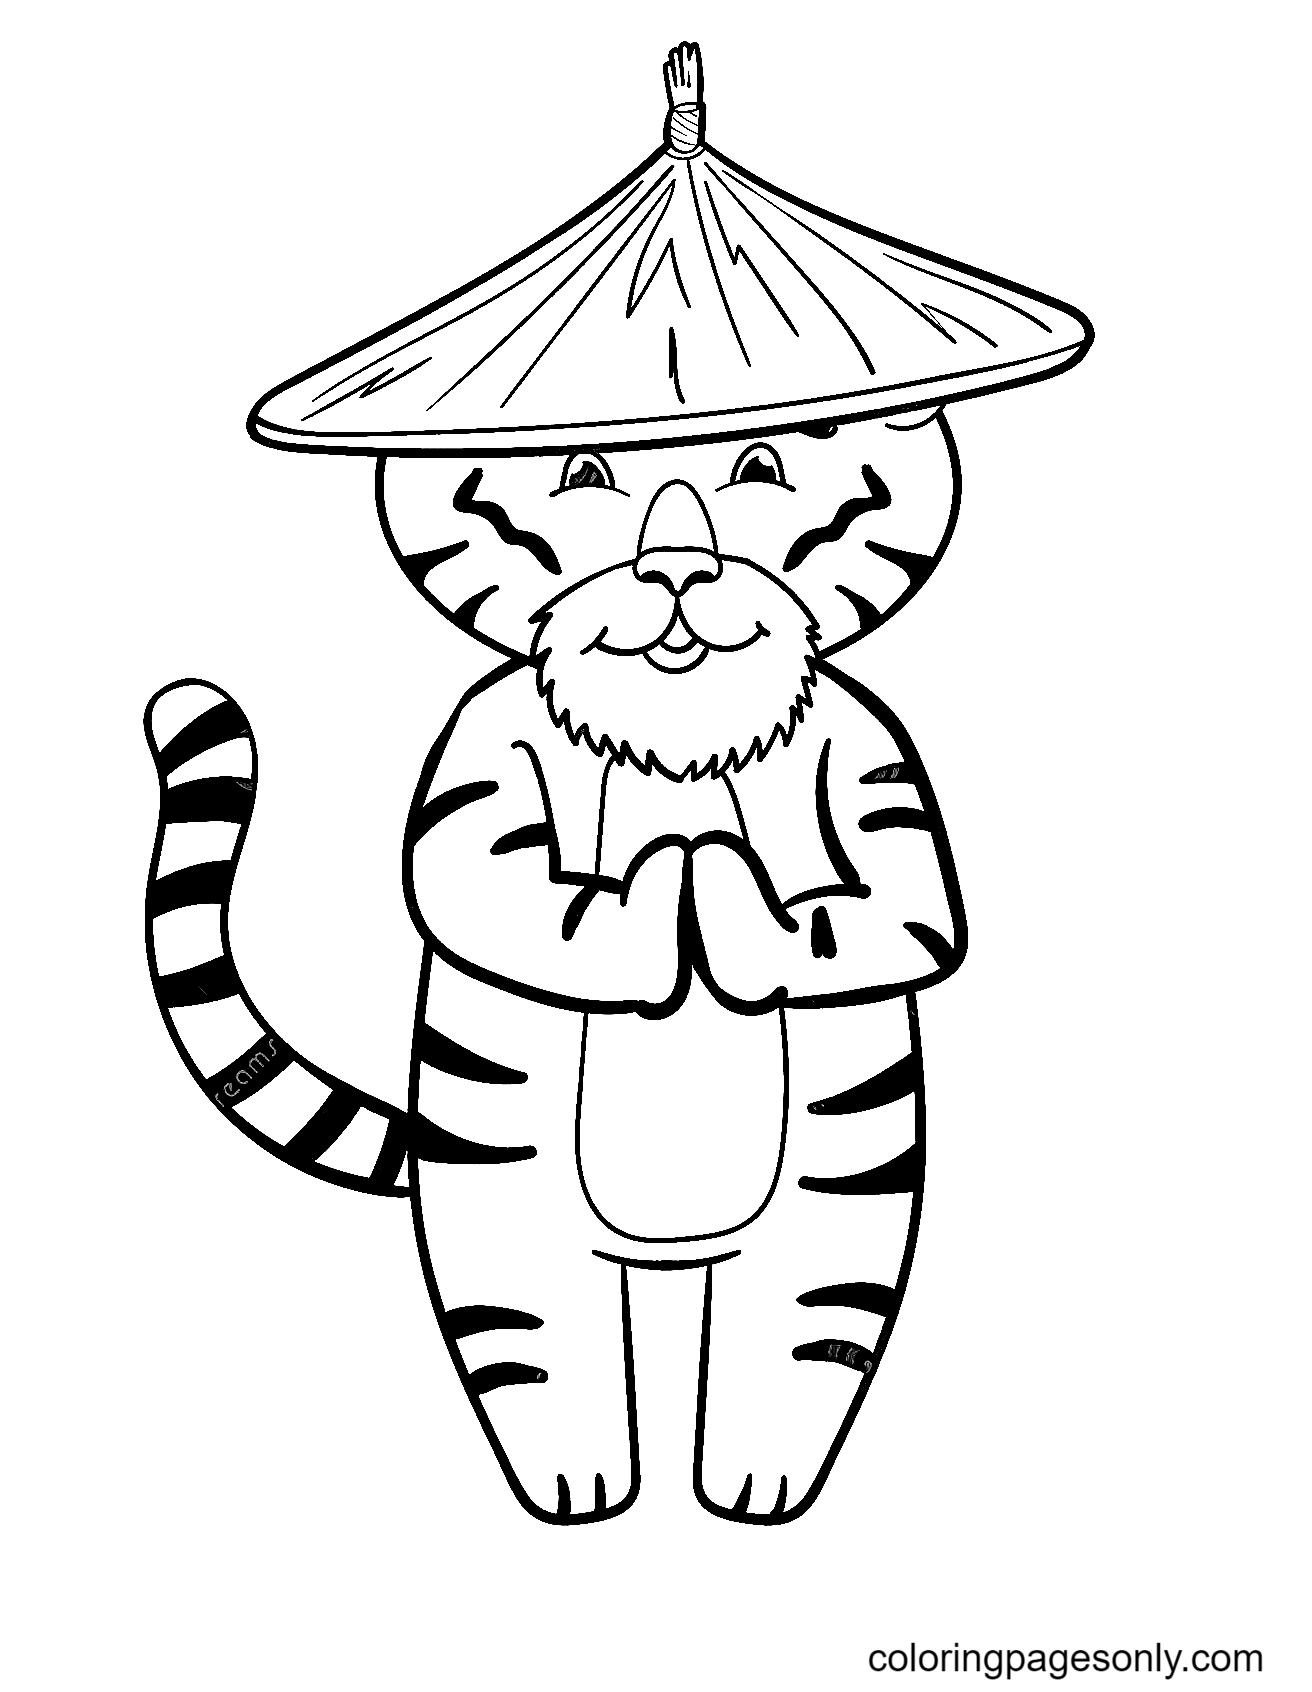 Tiger New Year 2022 Coloring Page